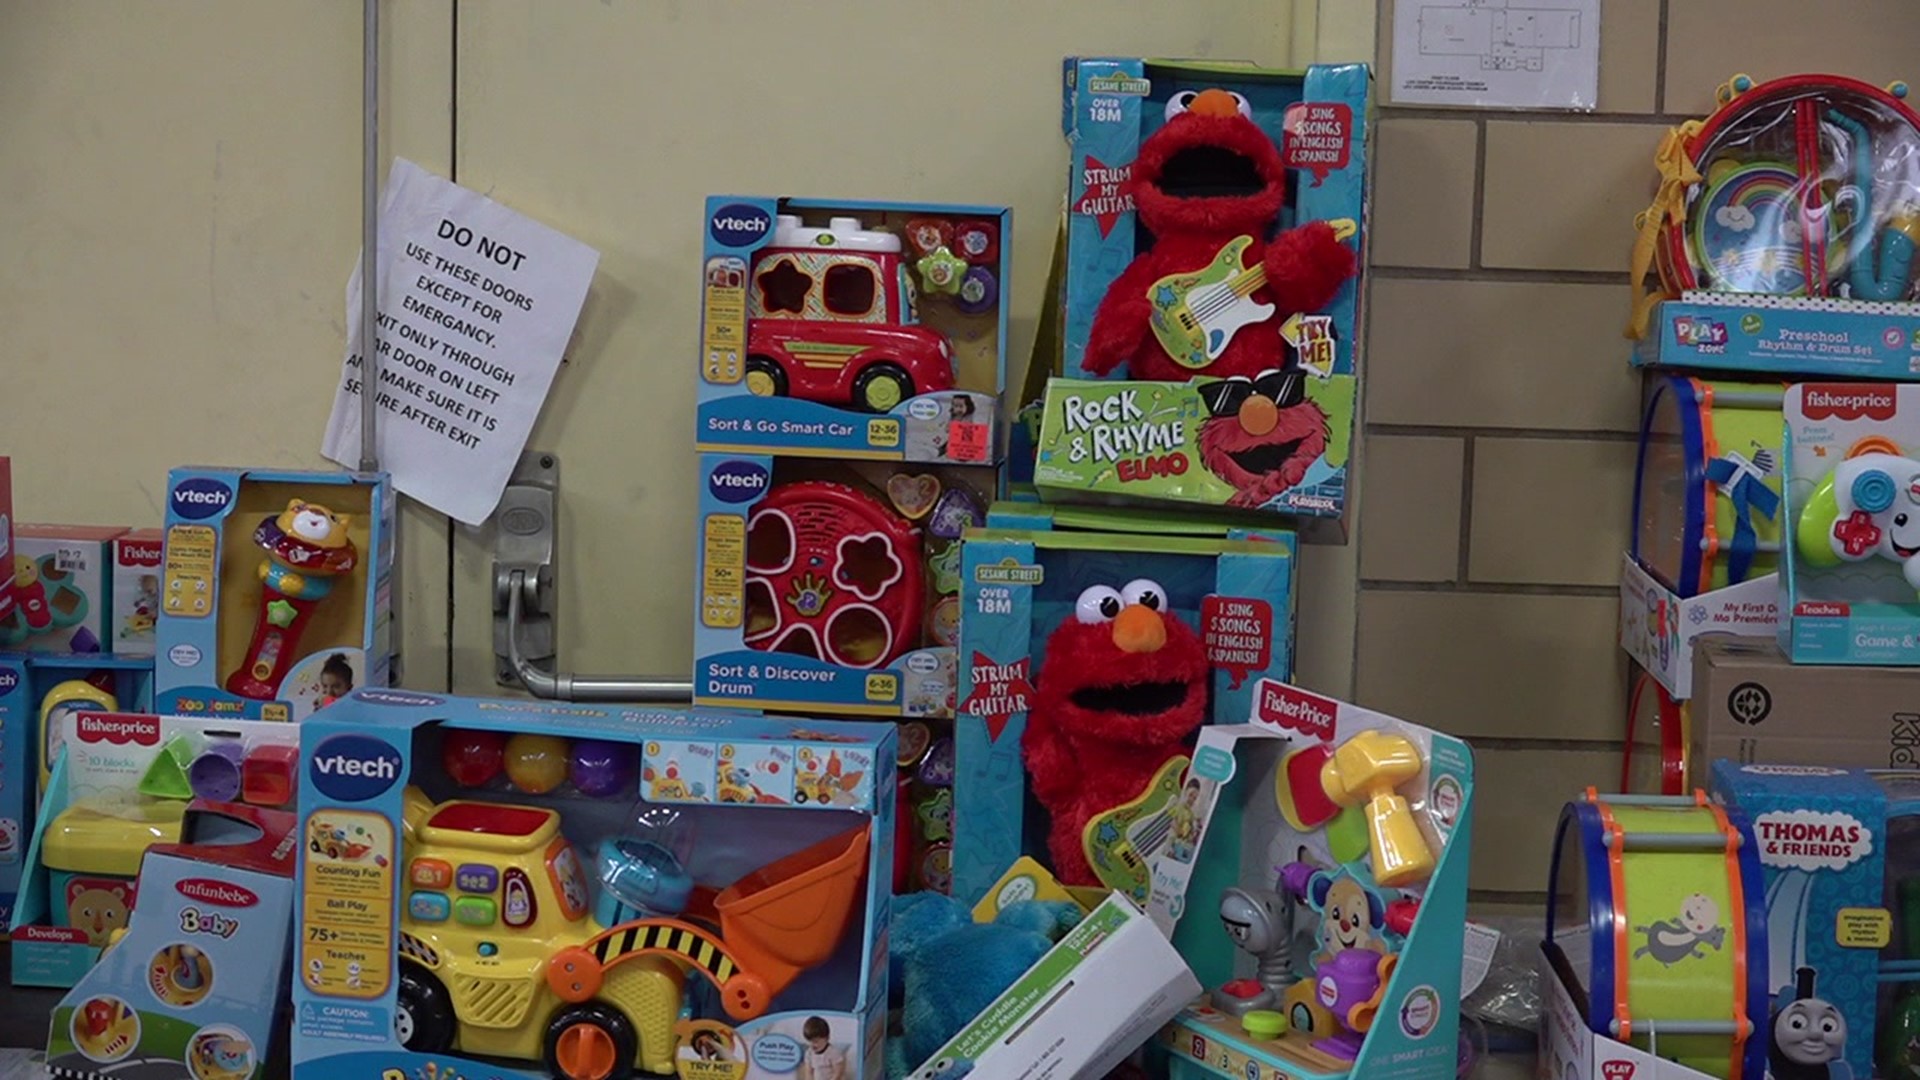 Two nonprofits joined forces in Schuylkill County to make sure every child has something to open on Christmas.